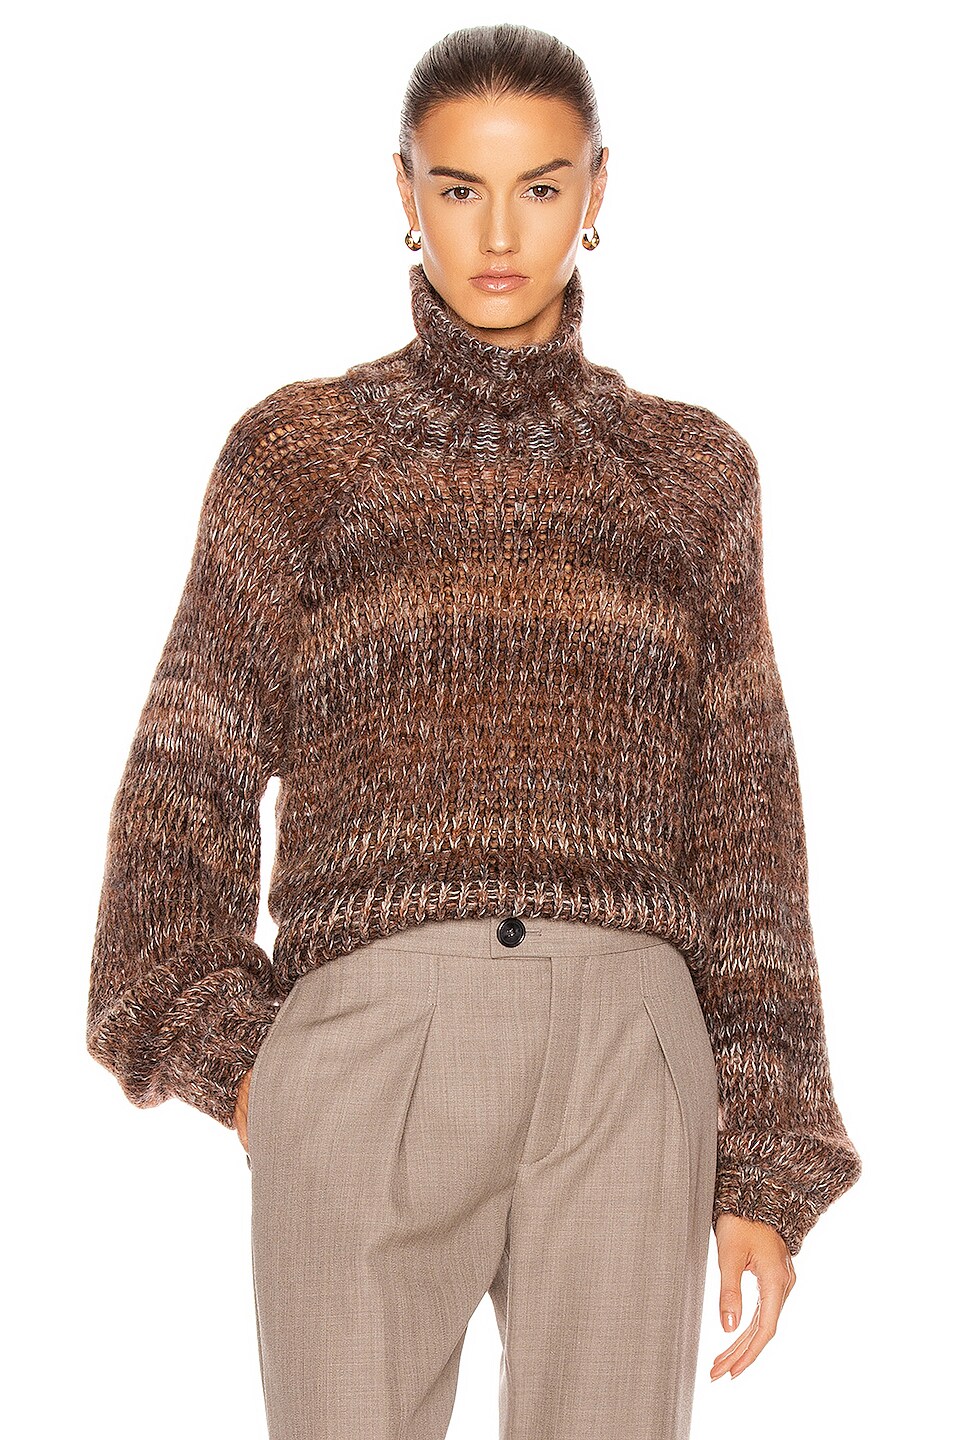 Image 1 of The Range Fog Mohair Knit Gradient Turtleneck Sweater in Whiskey Gradient